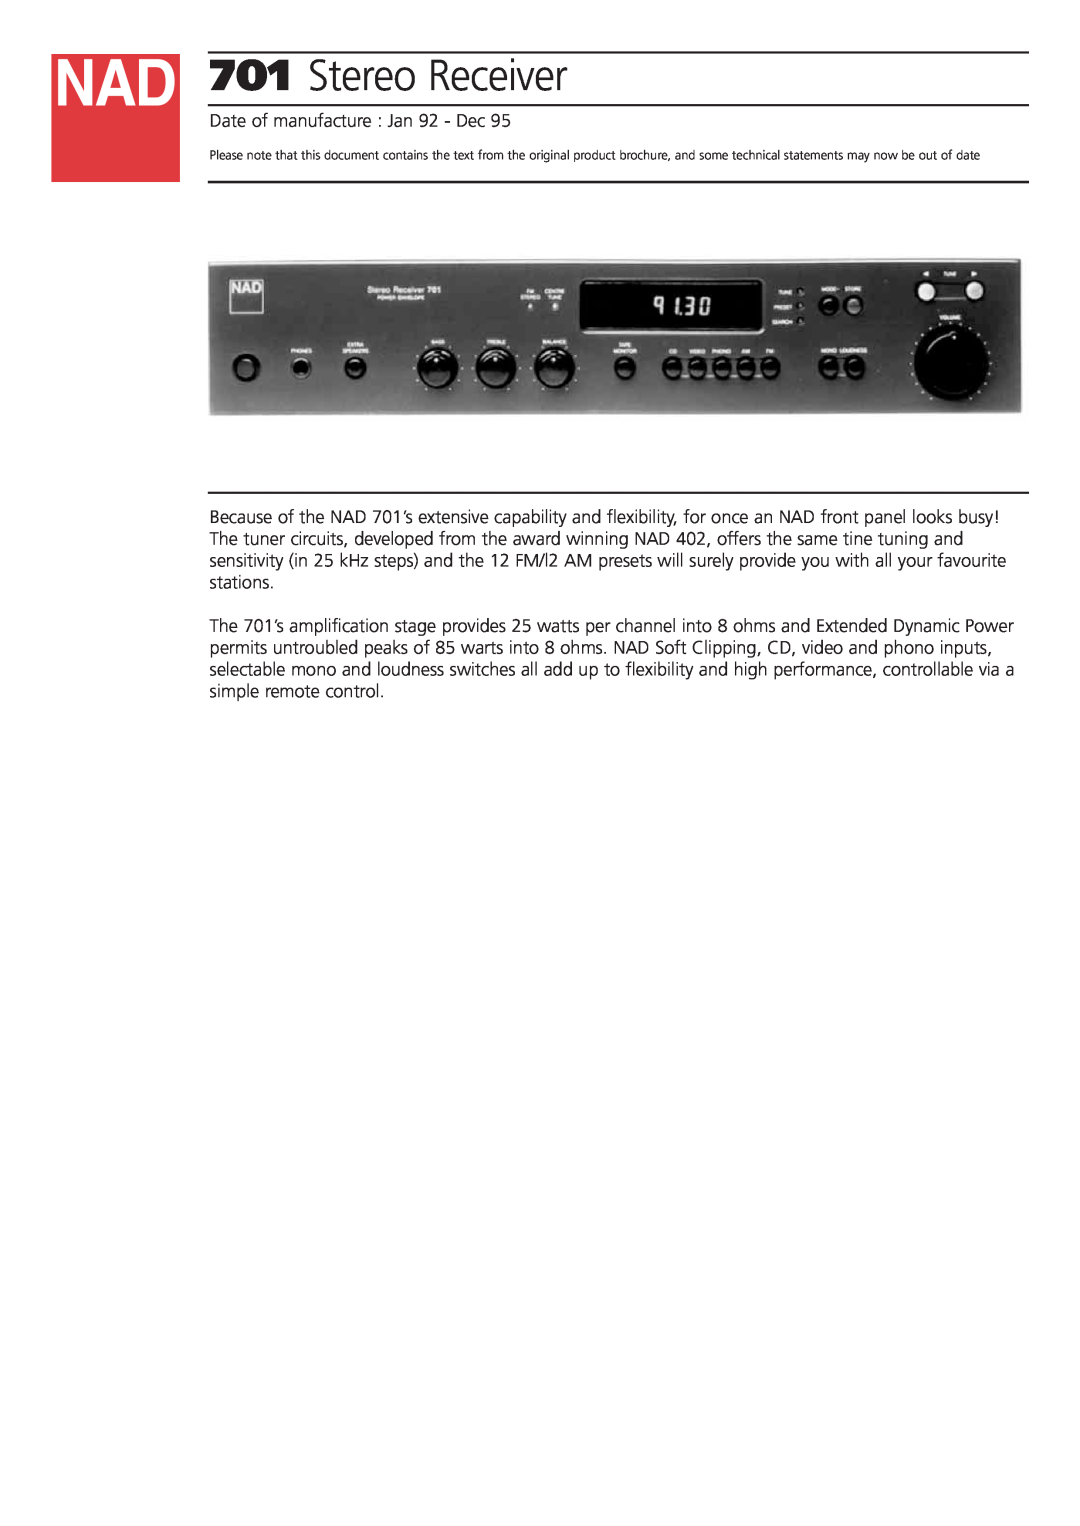 NAD brochure 701Stereo Receiver 